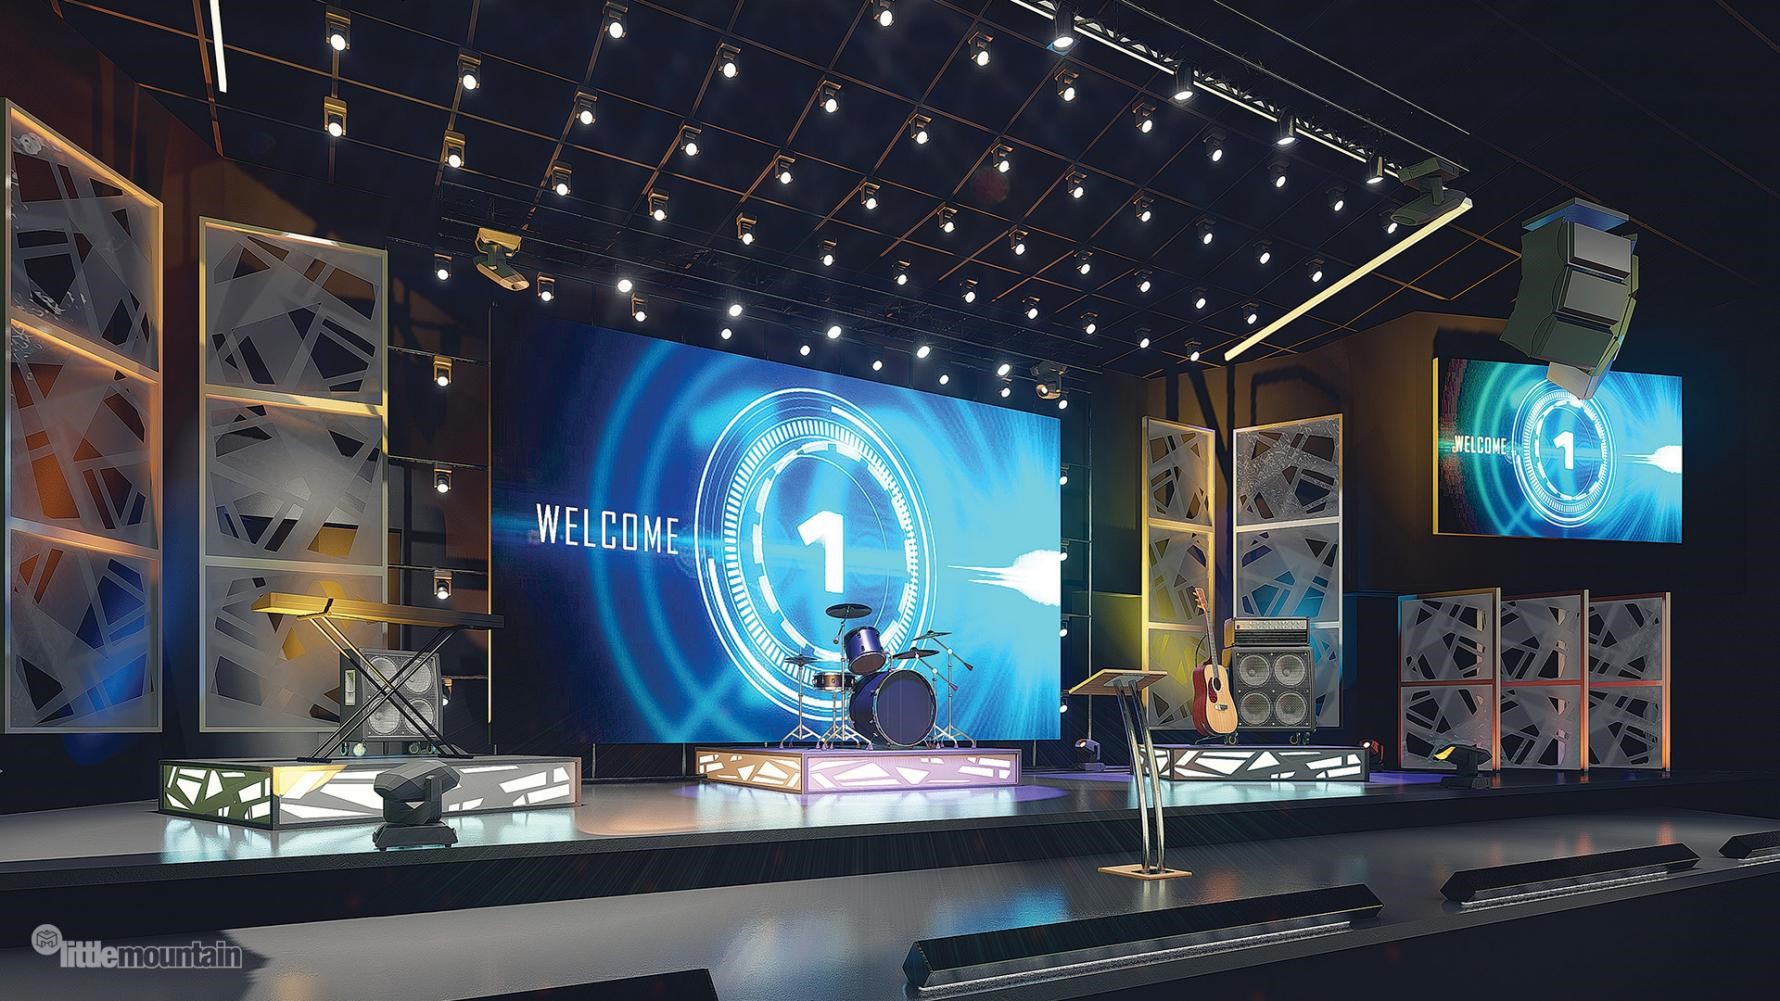 What to pay attention to when customizing indoor led display